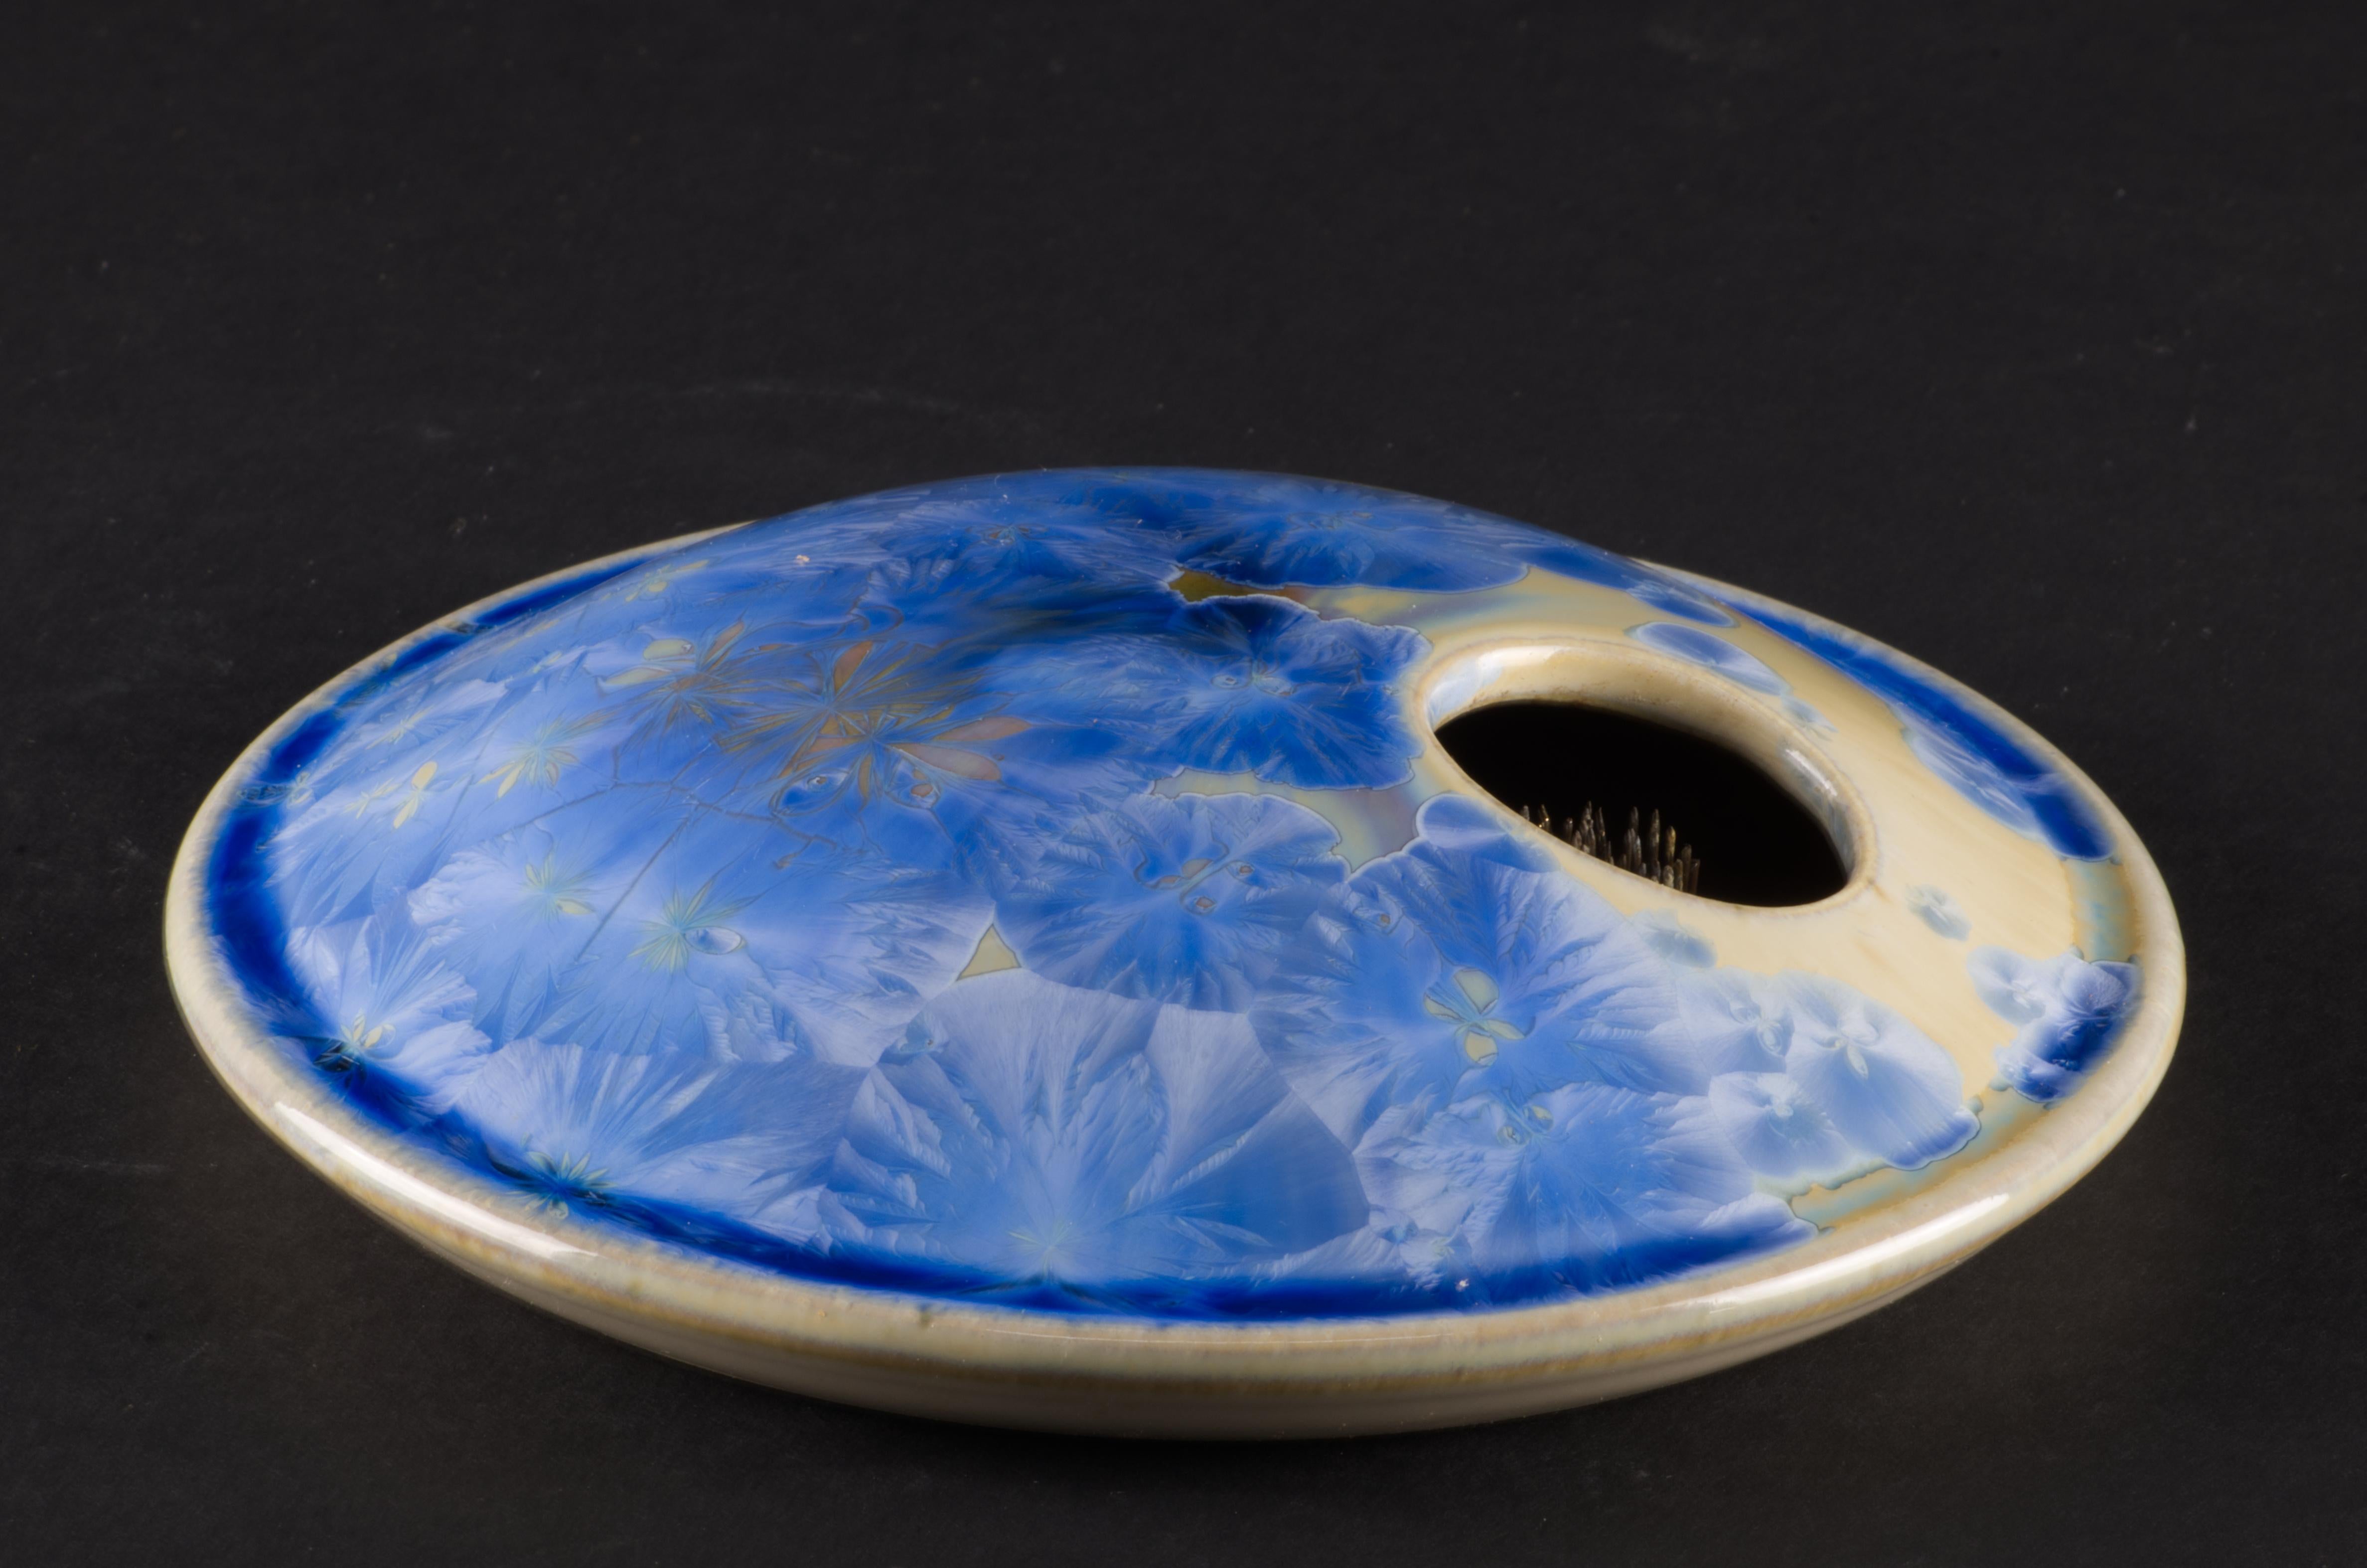  The vintage studio pottery ceramic ikebana vase is decorated with crystalline glaze in striking, bright blue and yellow palette. The vase was hand thrown on a wheel; blue color crystals on muted yellow colored base were grown in a kiln during a